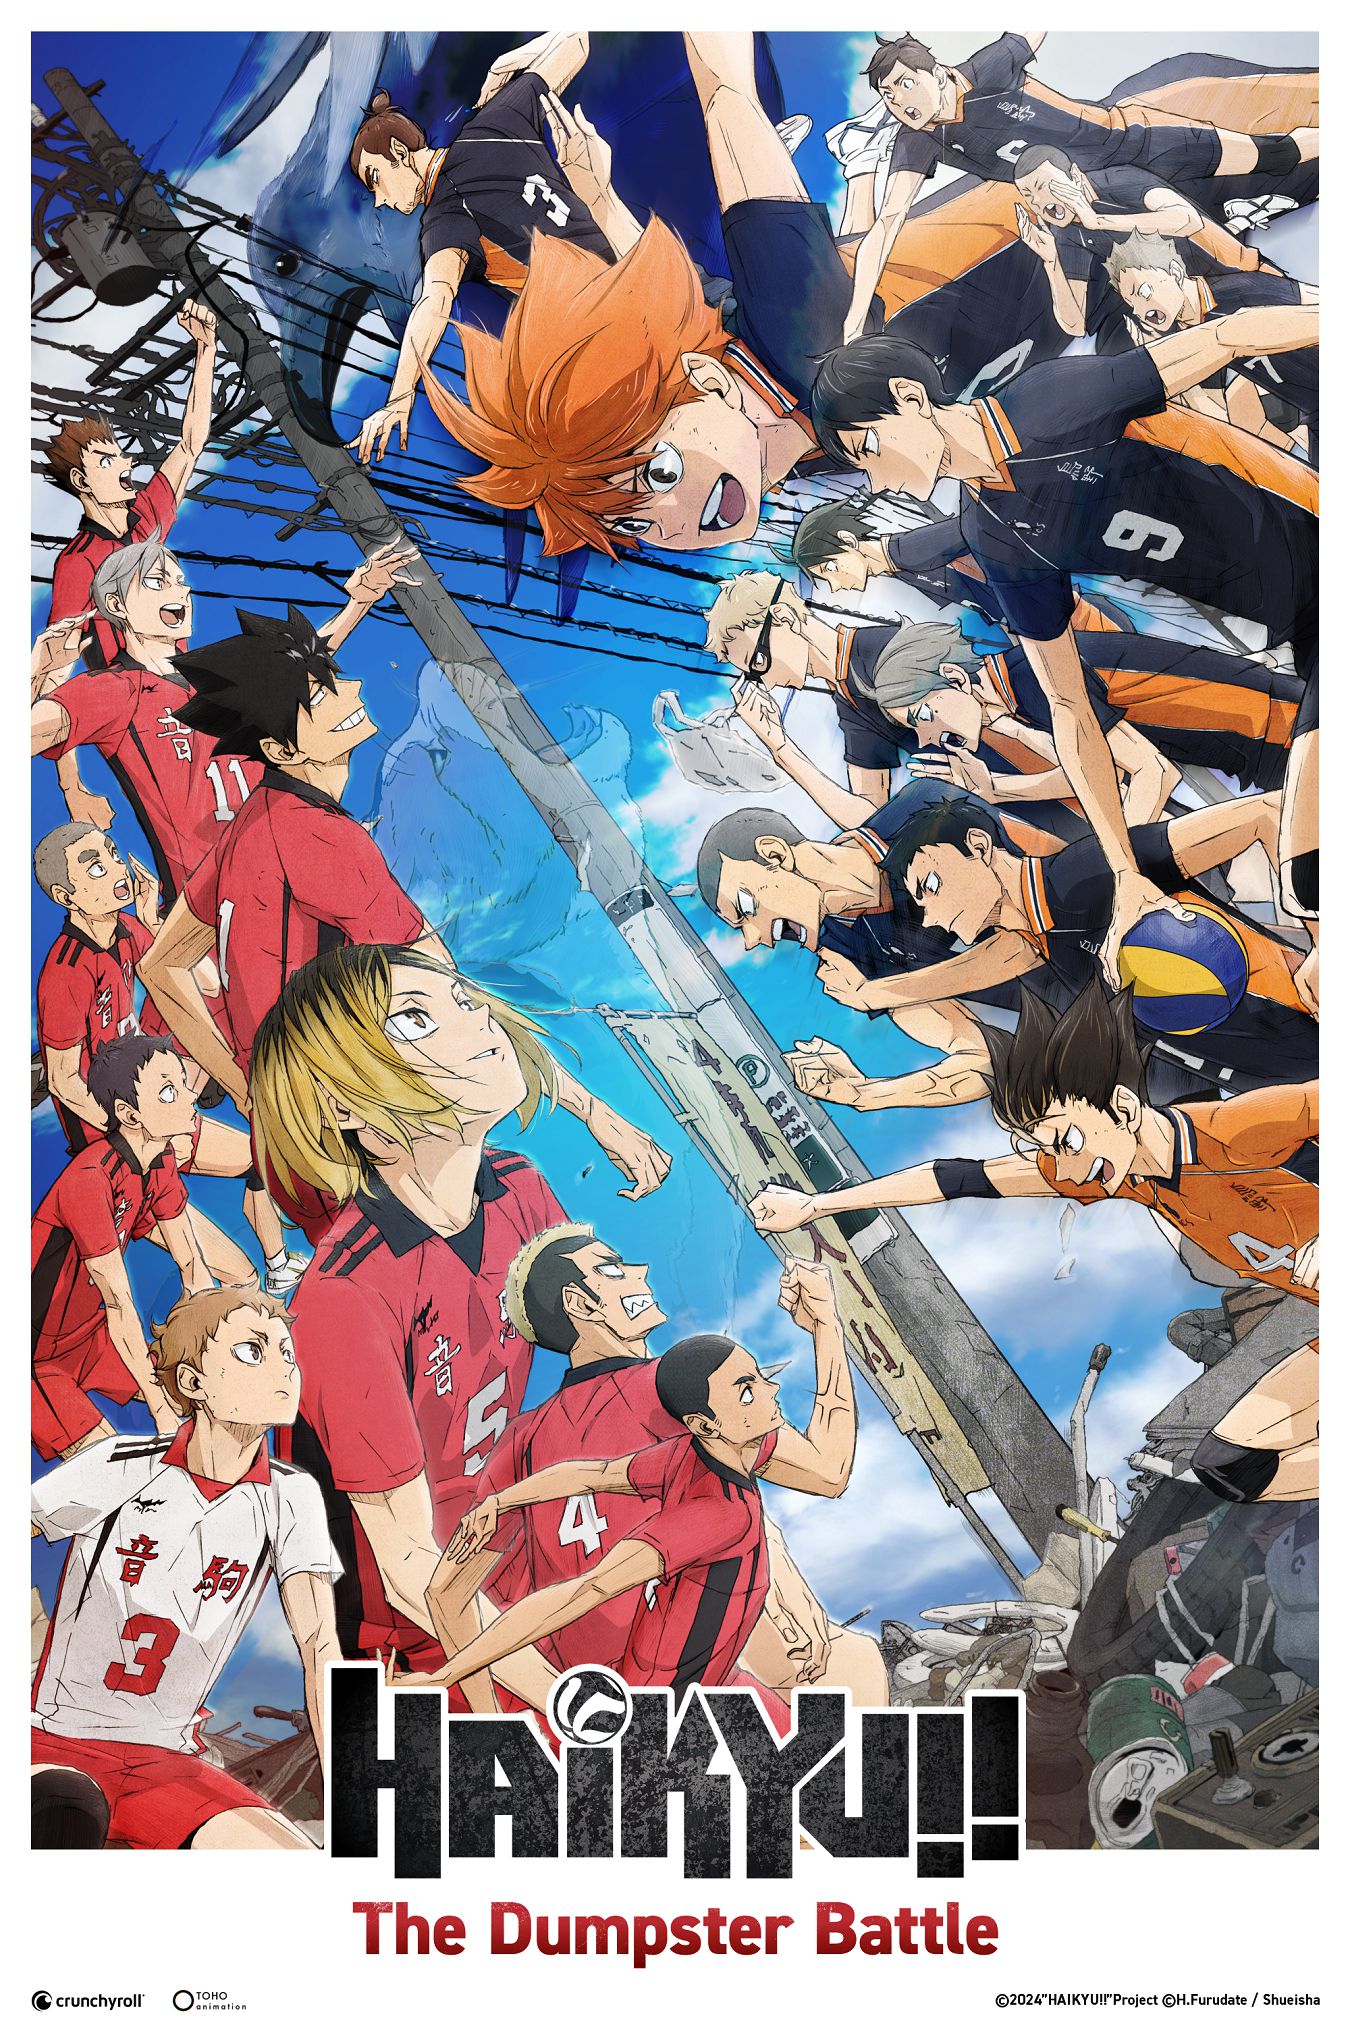 HAIKYUU The Dumpster Battle arrives at the cinema in Italy too, that's when!